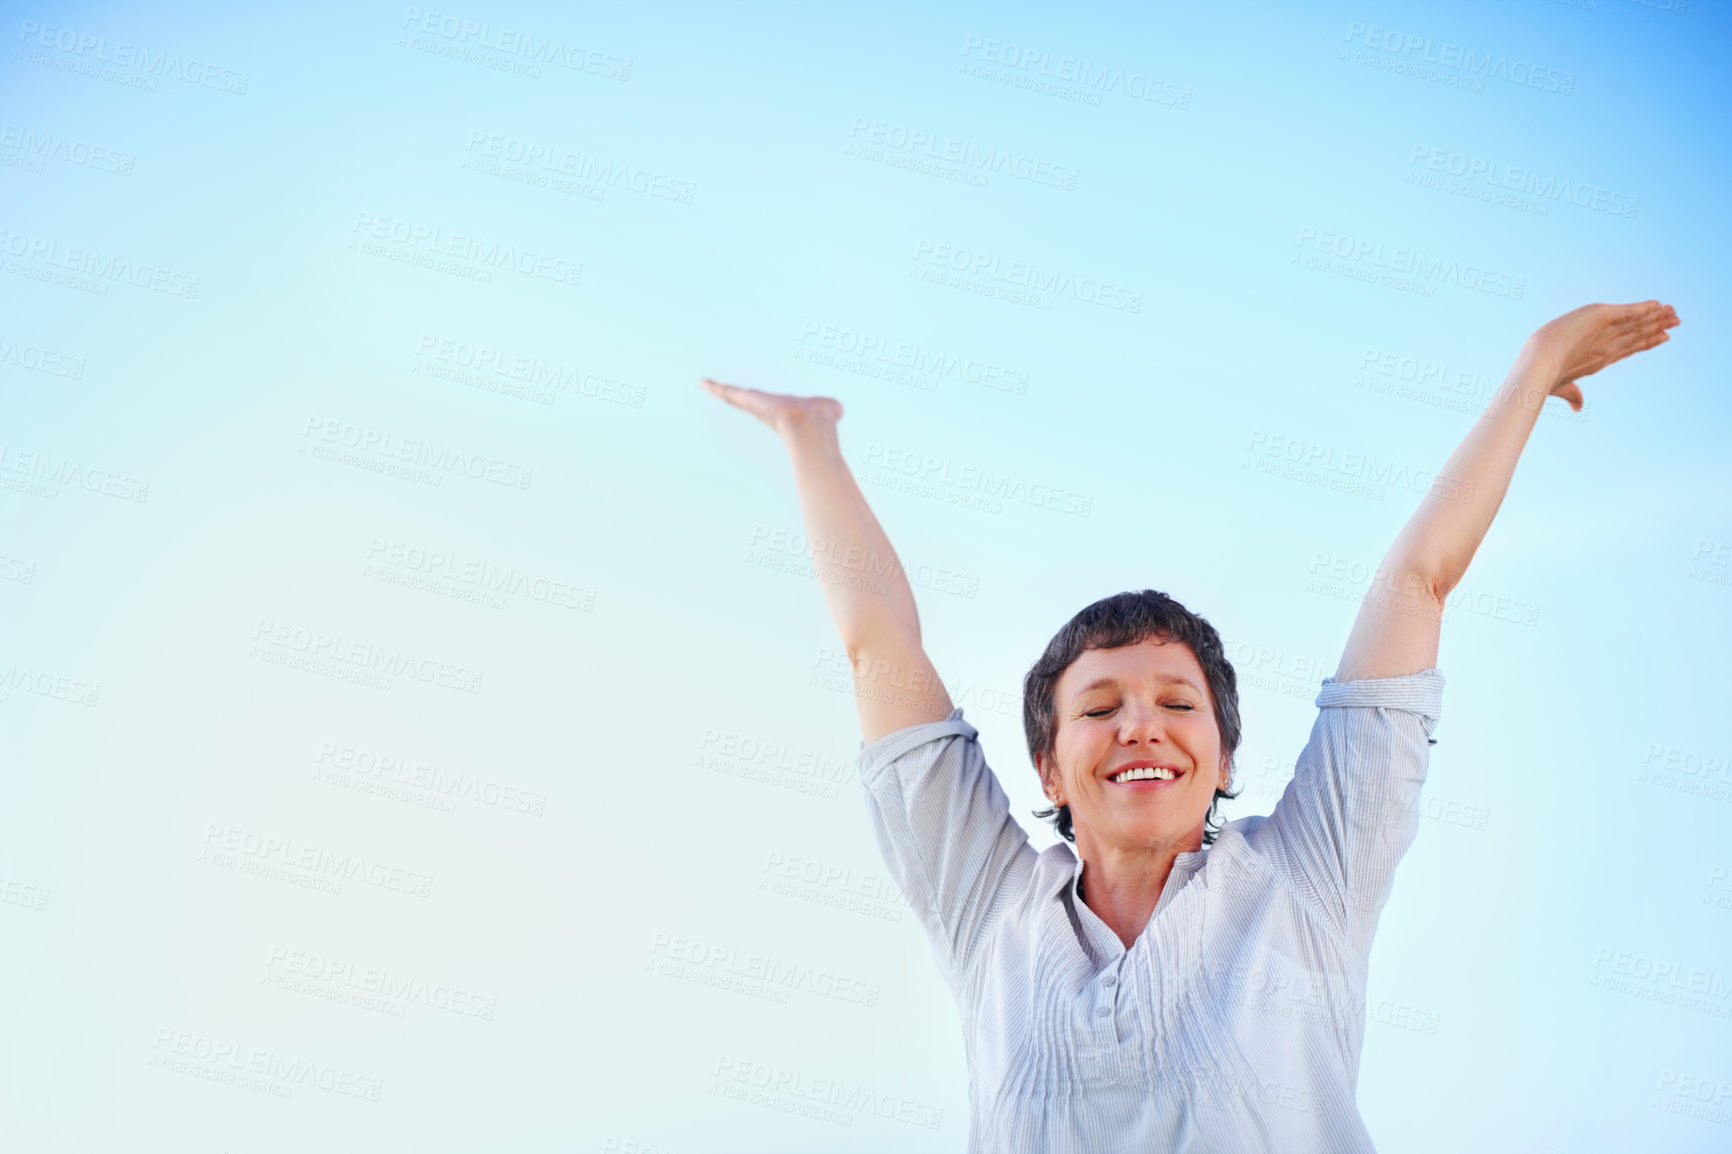 Buy stock photo Low angle view of playful mature woman enjoying freedom against sky with hands outstretched